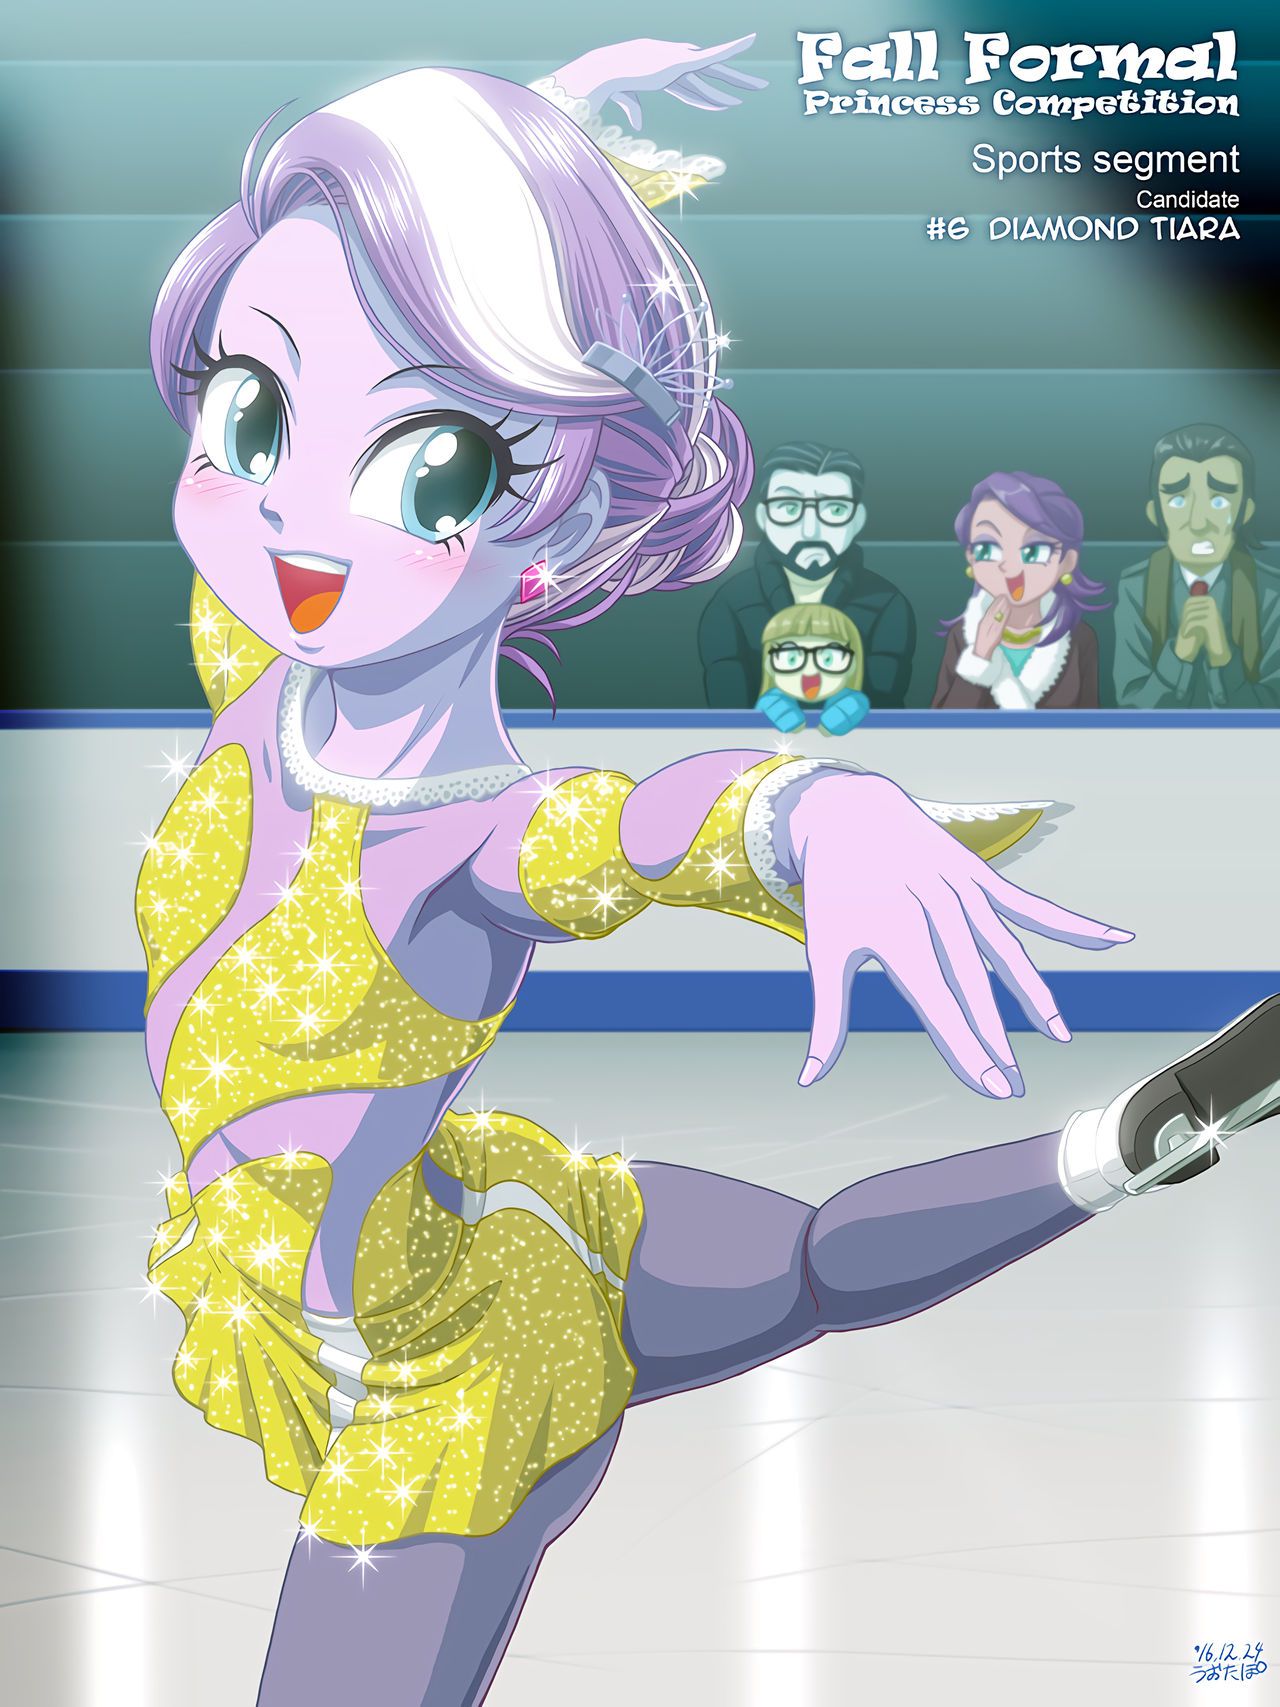 [uotapo] Fall Formal Princess Competition Sports Segment [optimized] [webp torrent] 6